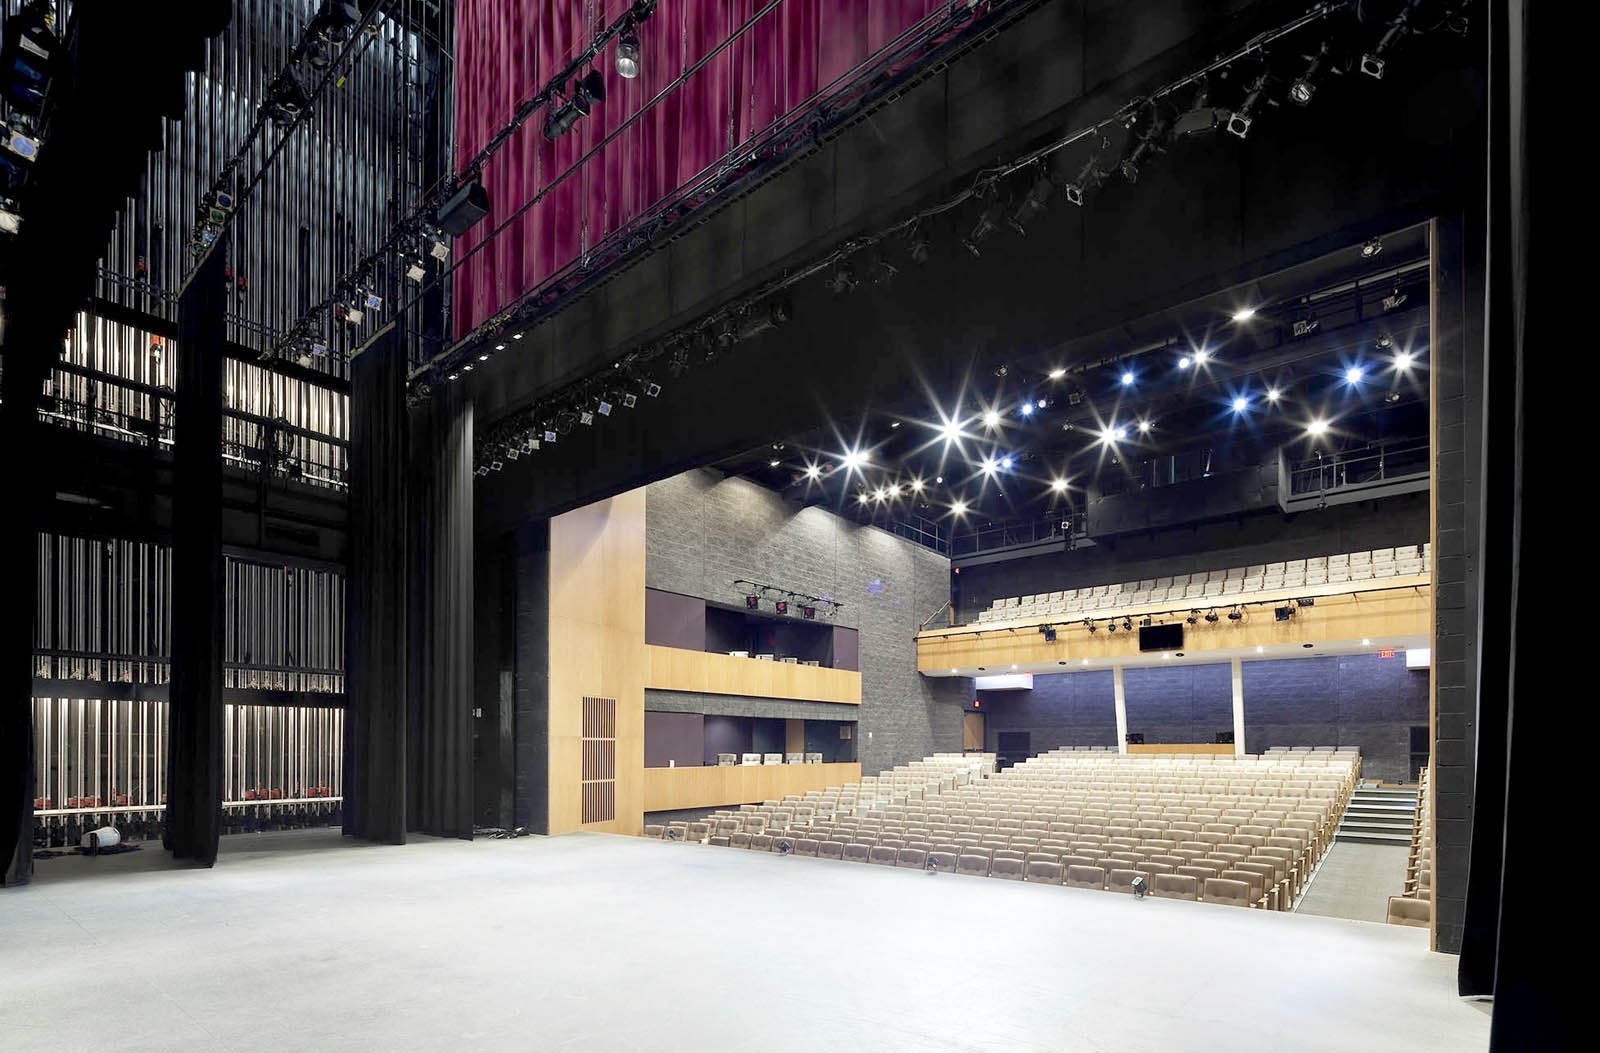 The curtain raises once again in December at Hamilton Family Theatre Cambridge after closing its doors in March 2020.